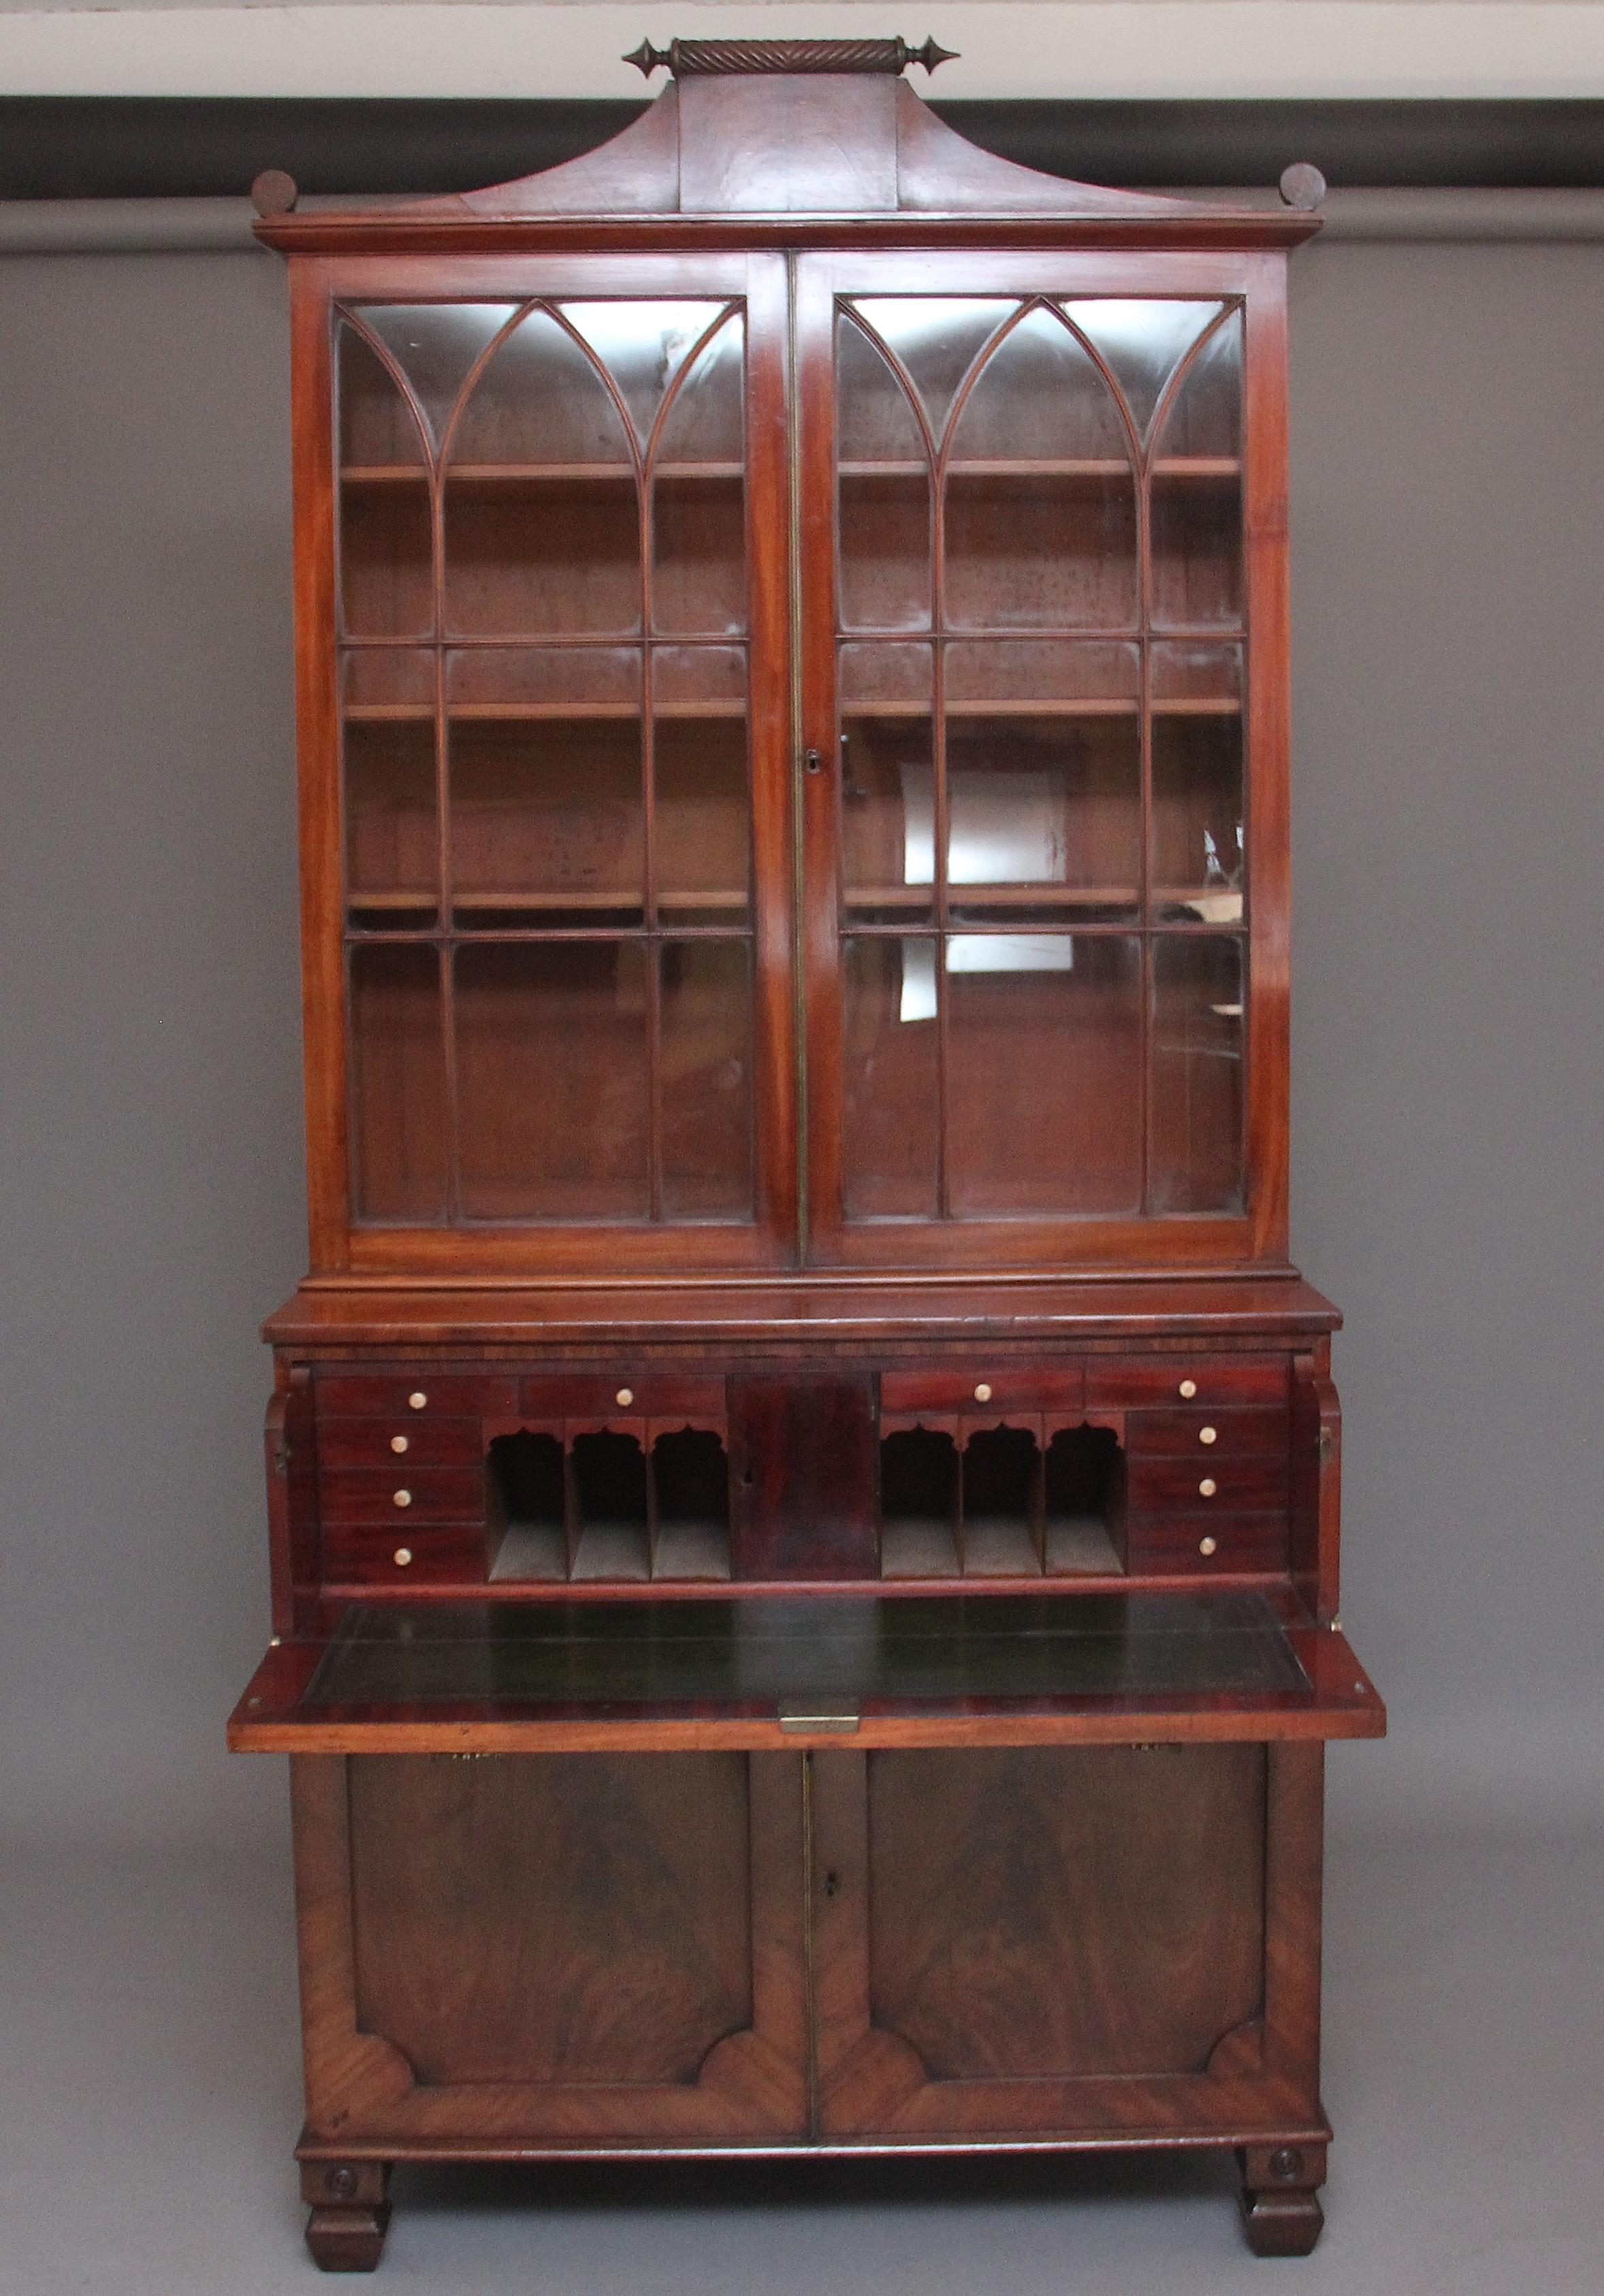 Early 19th century flame mahogany secretaire bookcase, the top having a decorative scrolled pediment above a pair of Gothic arched astragal glazed doors opening to reveal three adjustable shelves inside, the base having a secretaire drawer which